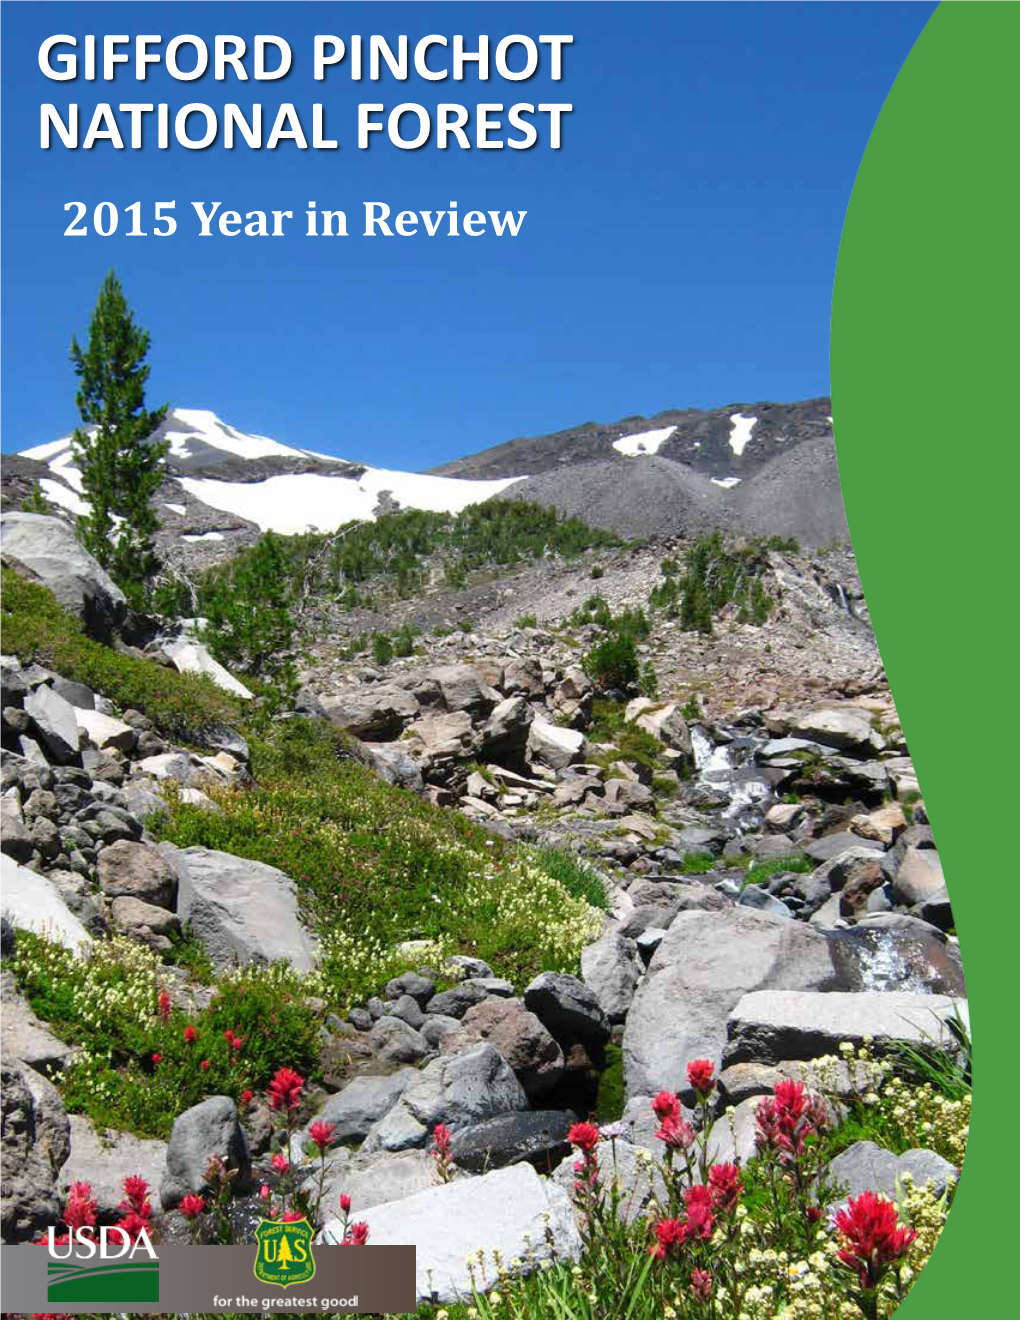 GIFFORD PINCHOT NATIONAL FOREST 2015 Year in Review 2015 on the Gifford Pinchot National Forest